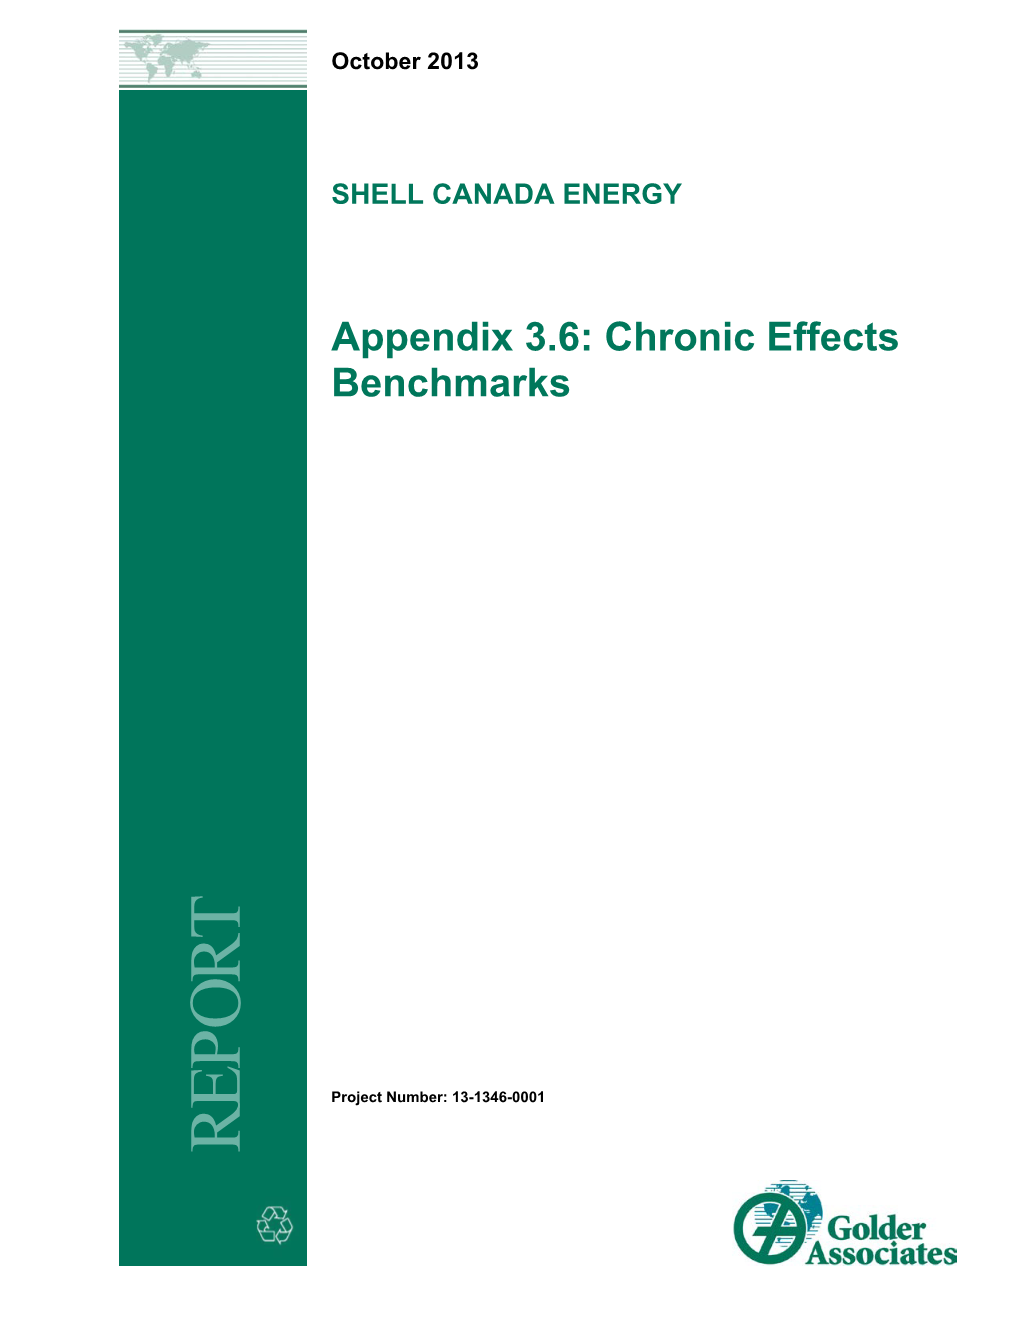 Appendix 3.6: Chronic Effects Benchmarks